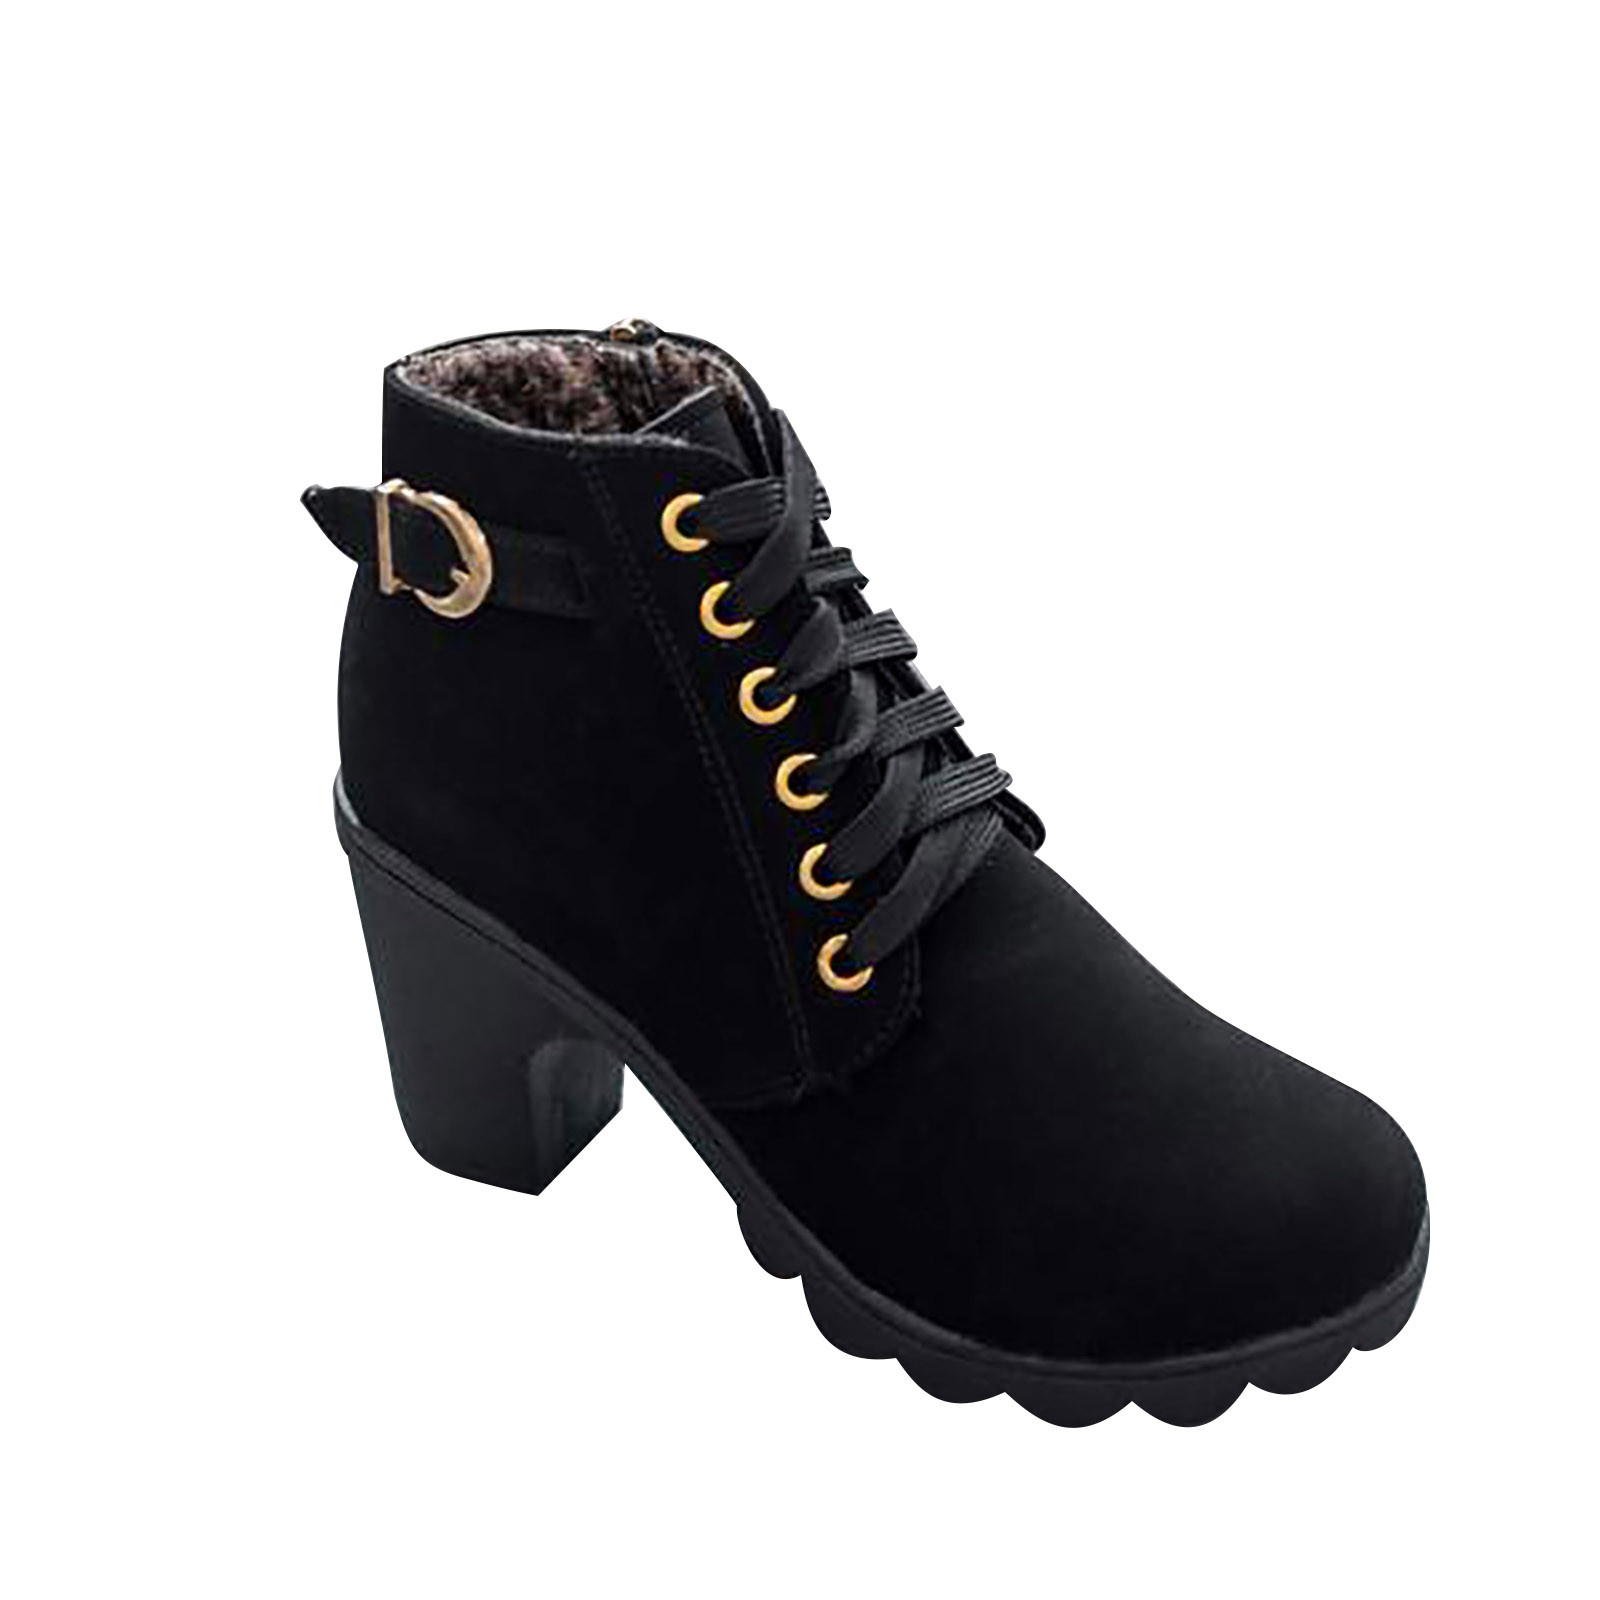 Tawop Black Boots Metal Solid Color Round Toe Thick Side Zipper Winter ...